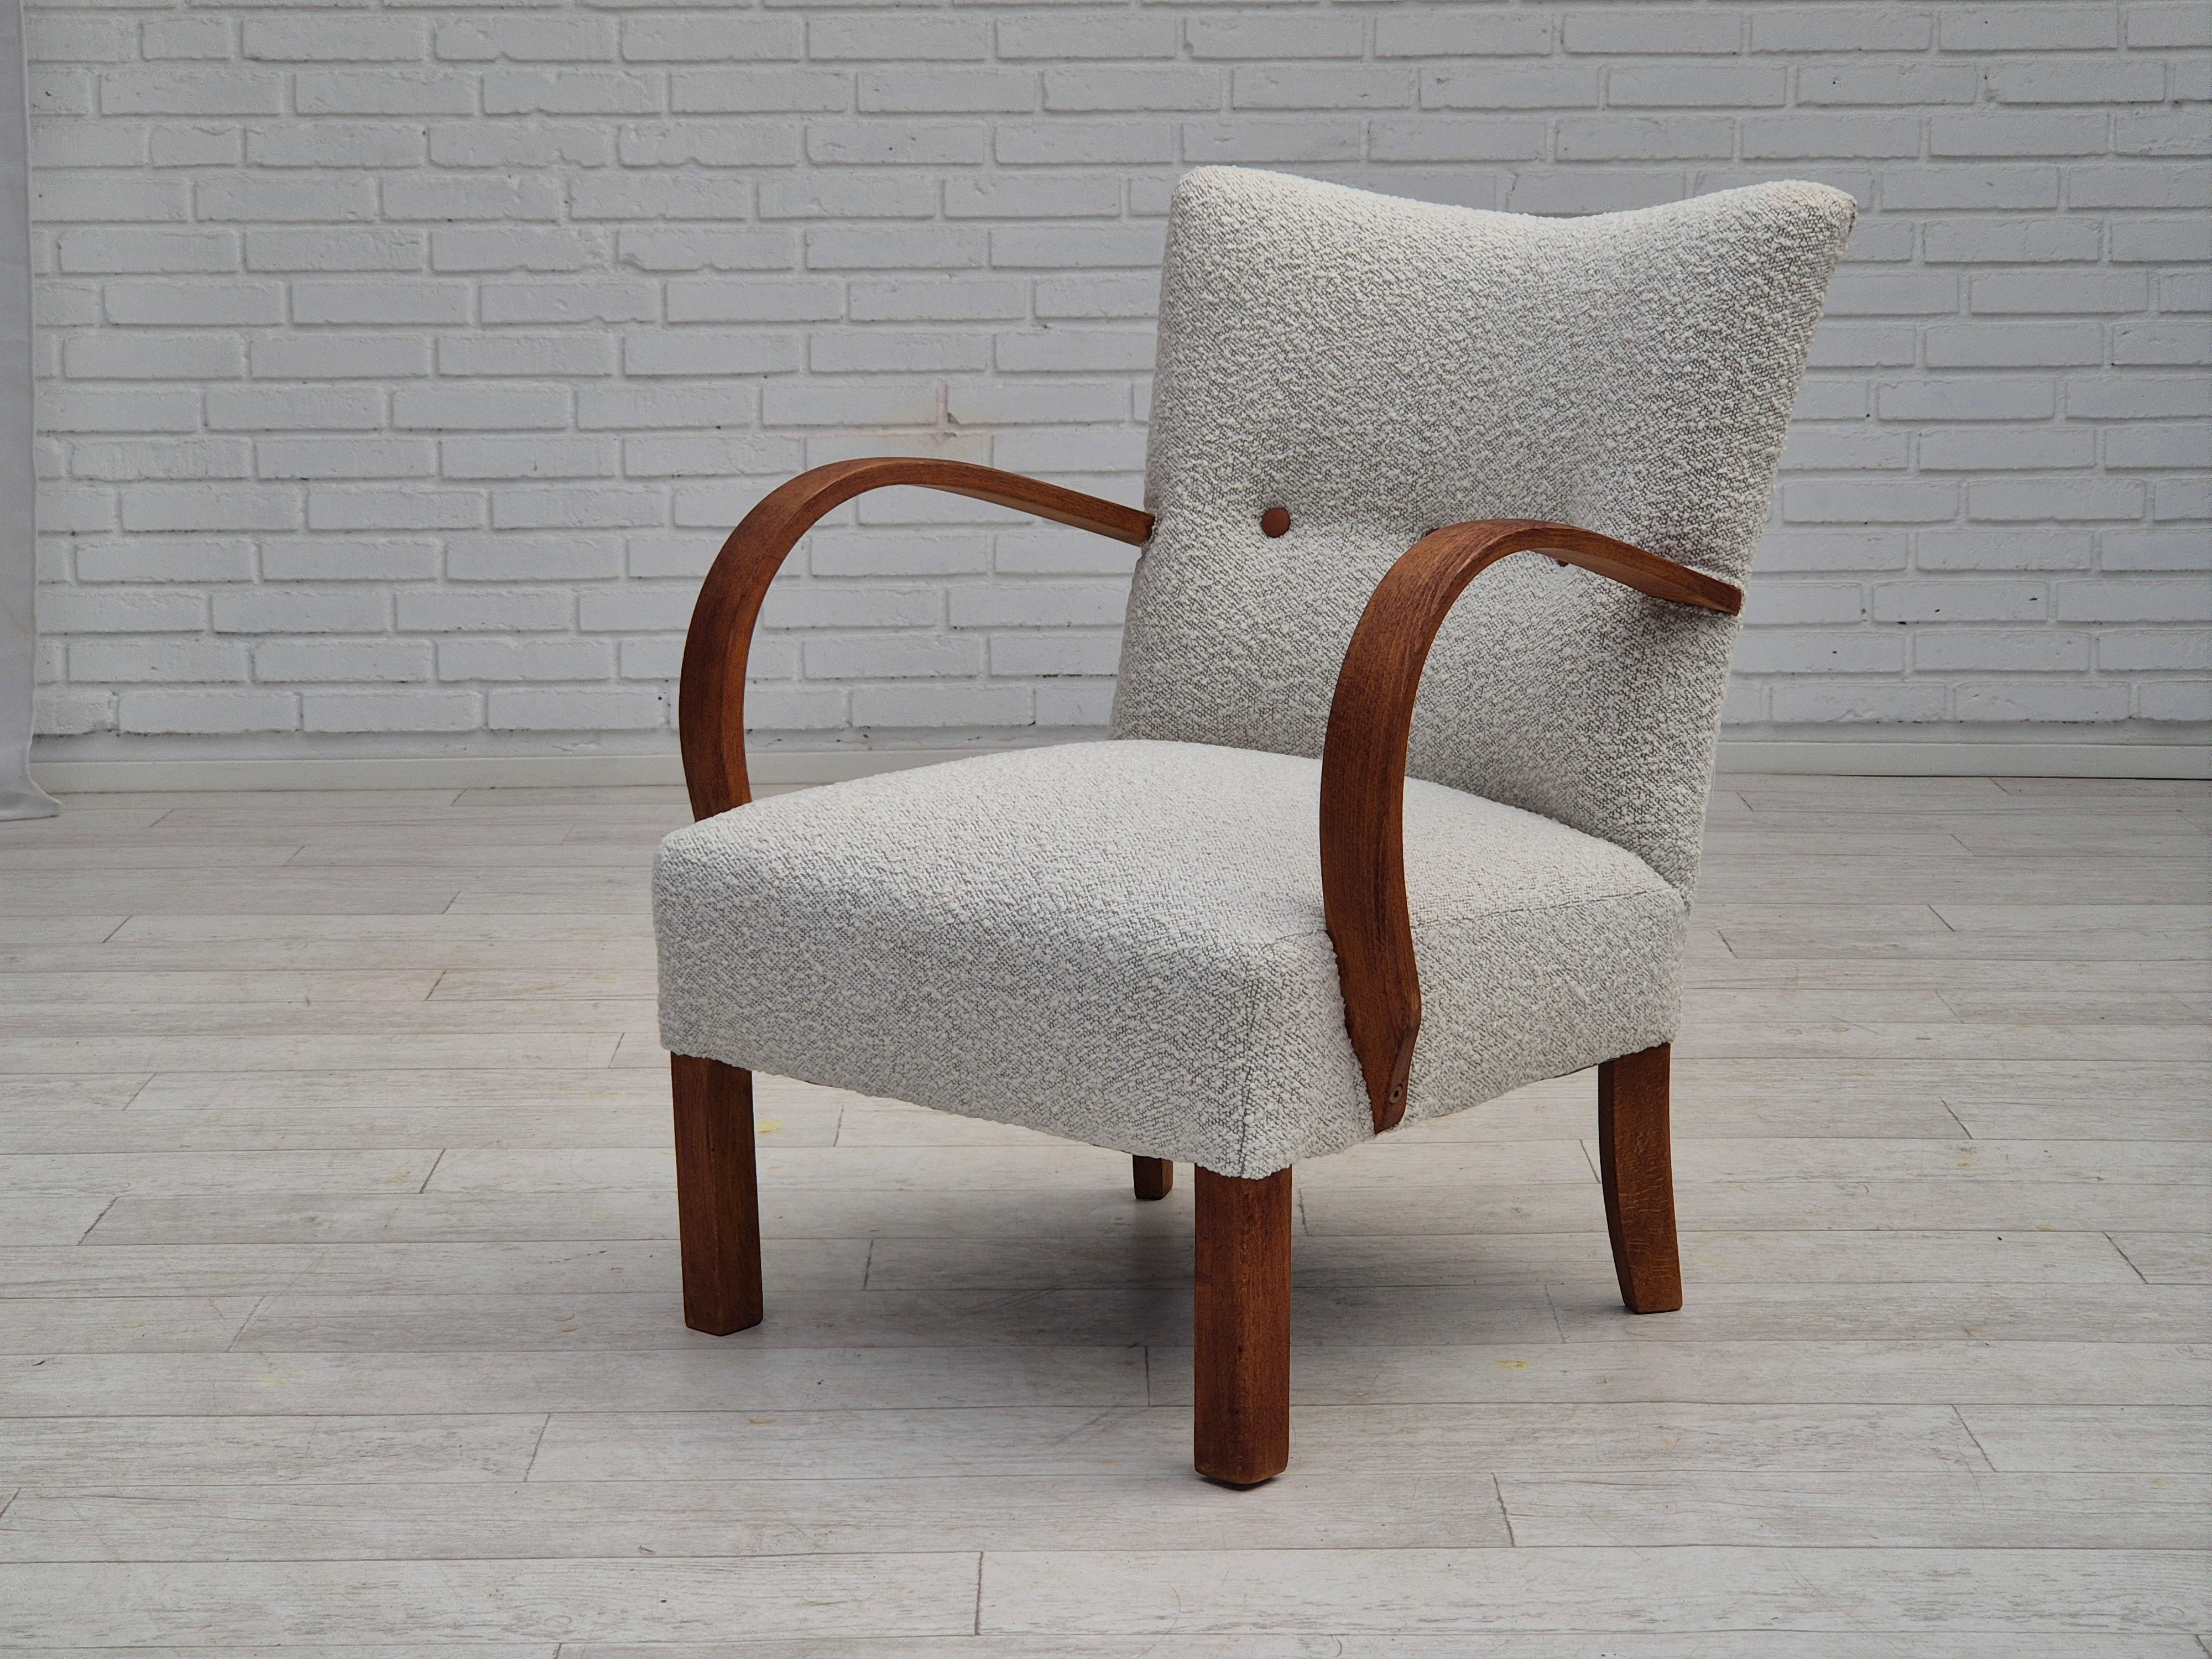 1960s, reupholstered Danish art-deco armchair, beech wood, leather. For Sale 11